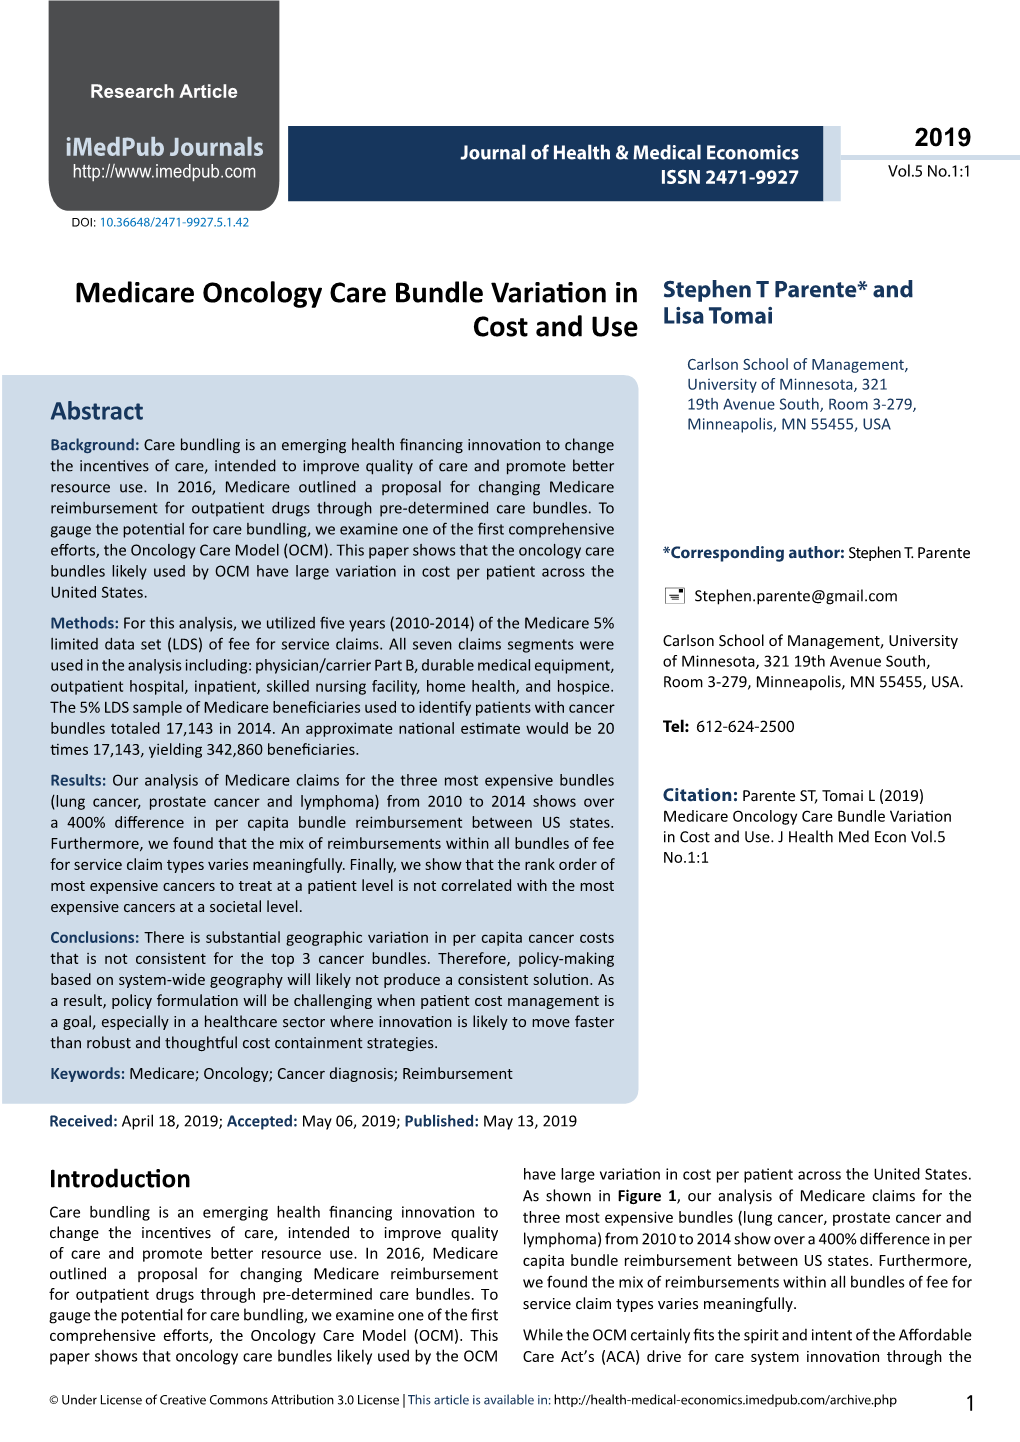 Medicare Oncology Care Bundle Variation in Cost And